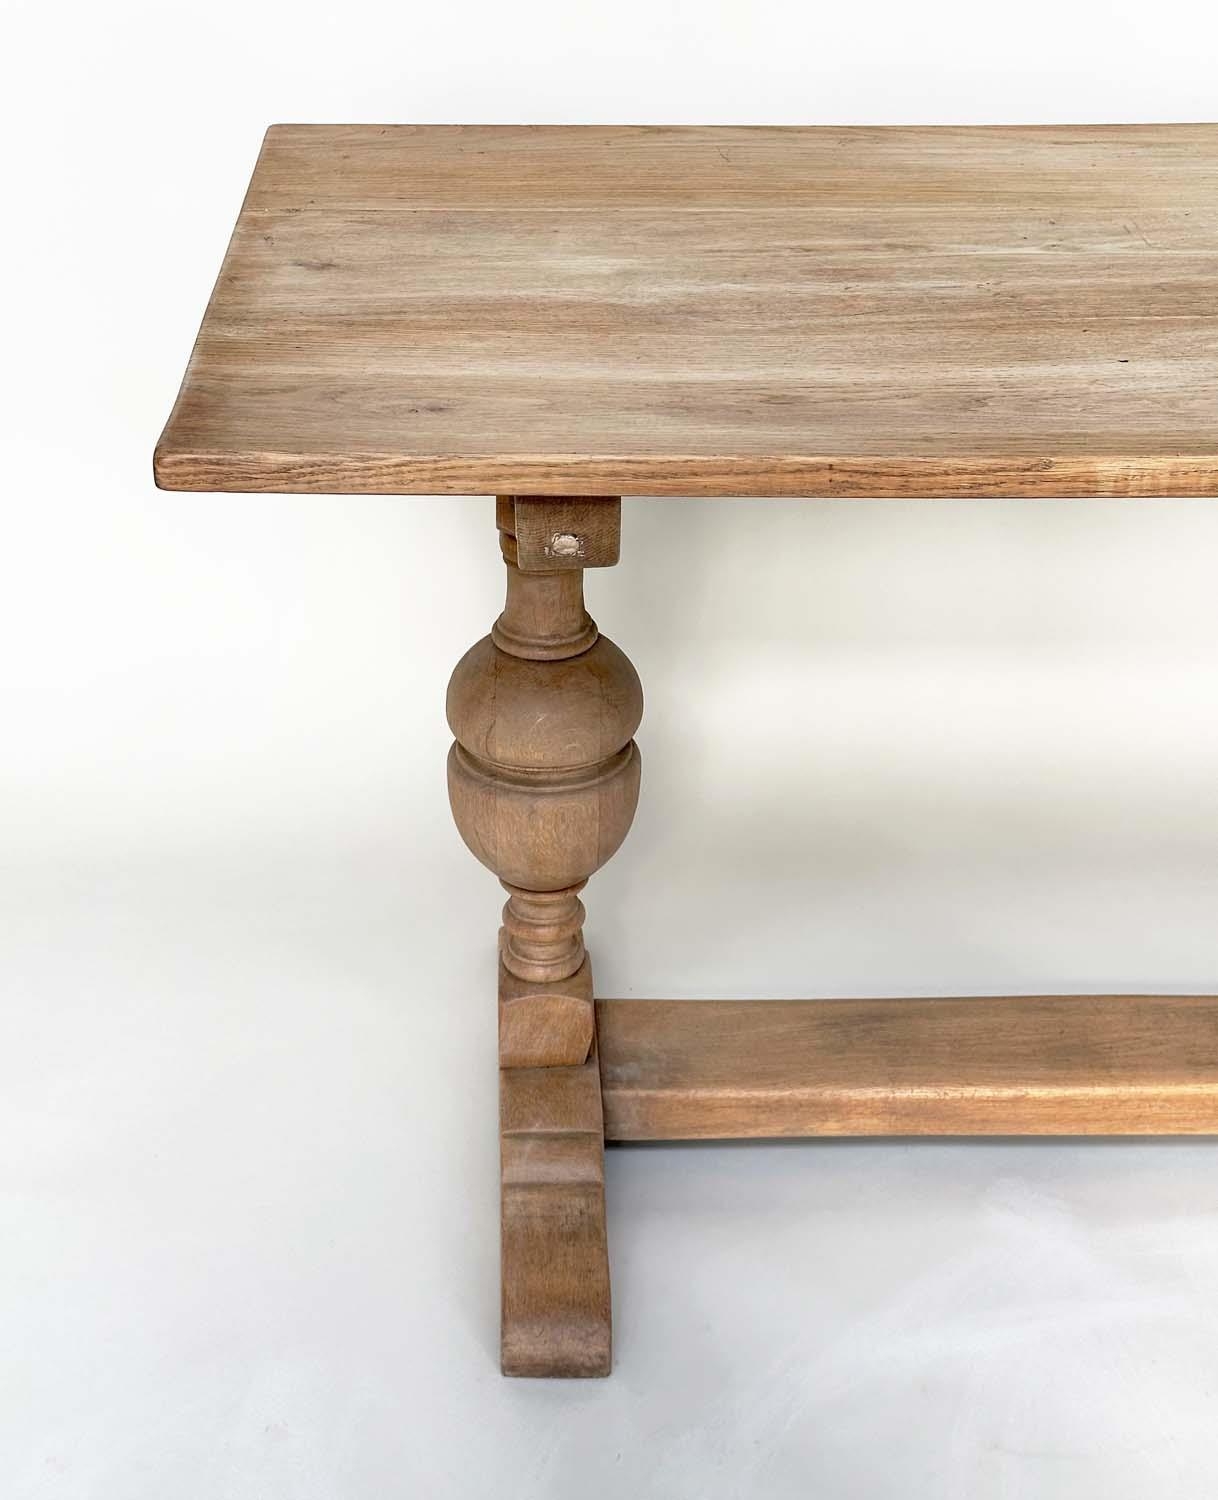 REFECTORY TABLE, early English style oak with planked top, cup and cover turned pillar trestles - Image 3 of 12